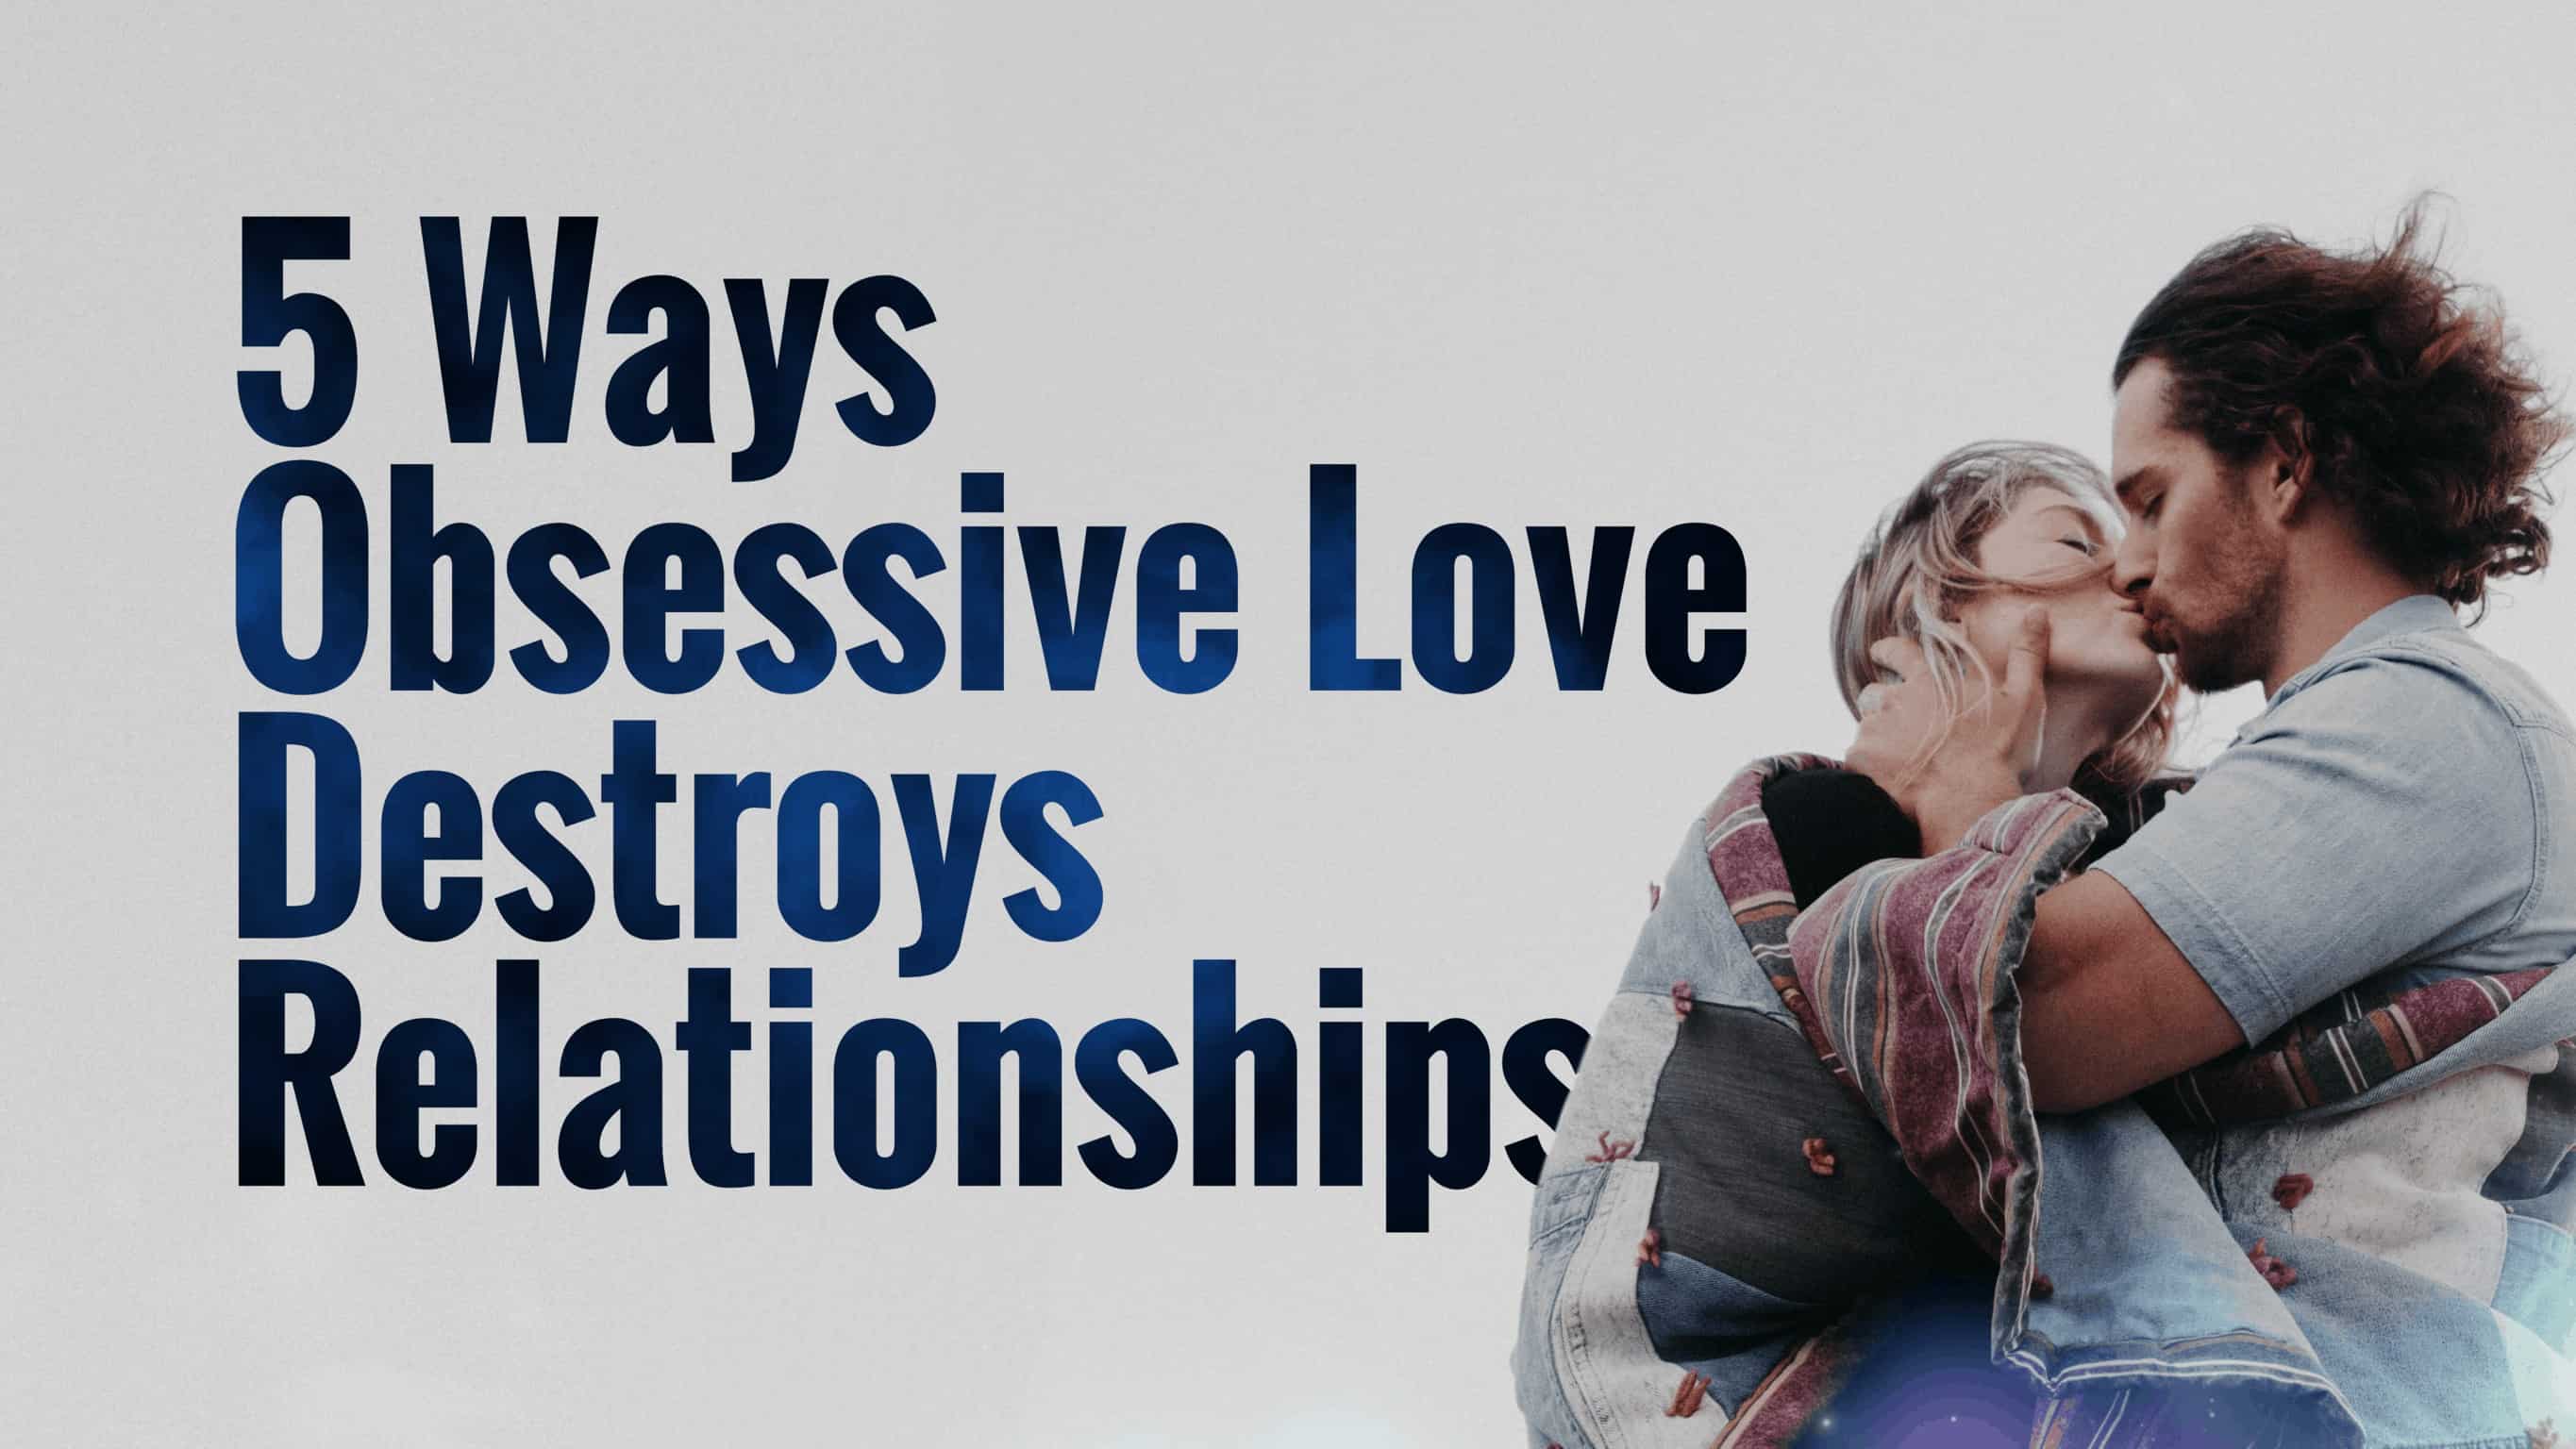 5 Ways Obsessive Love Destroys Relationships (And How to Prevent It)